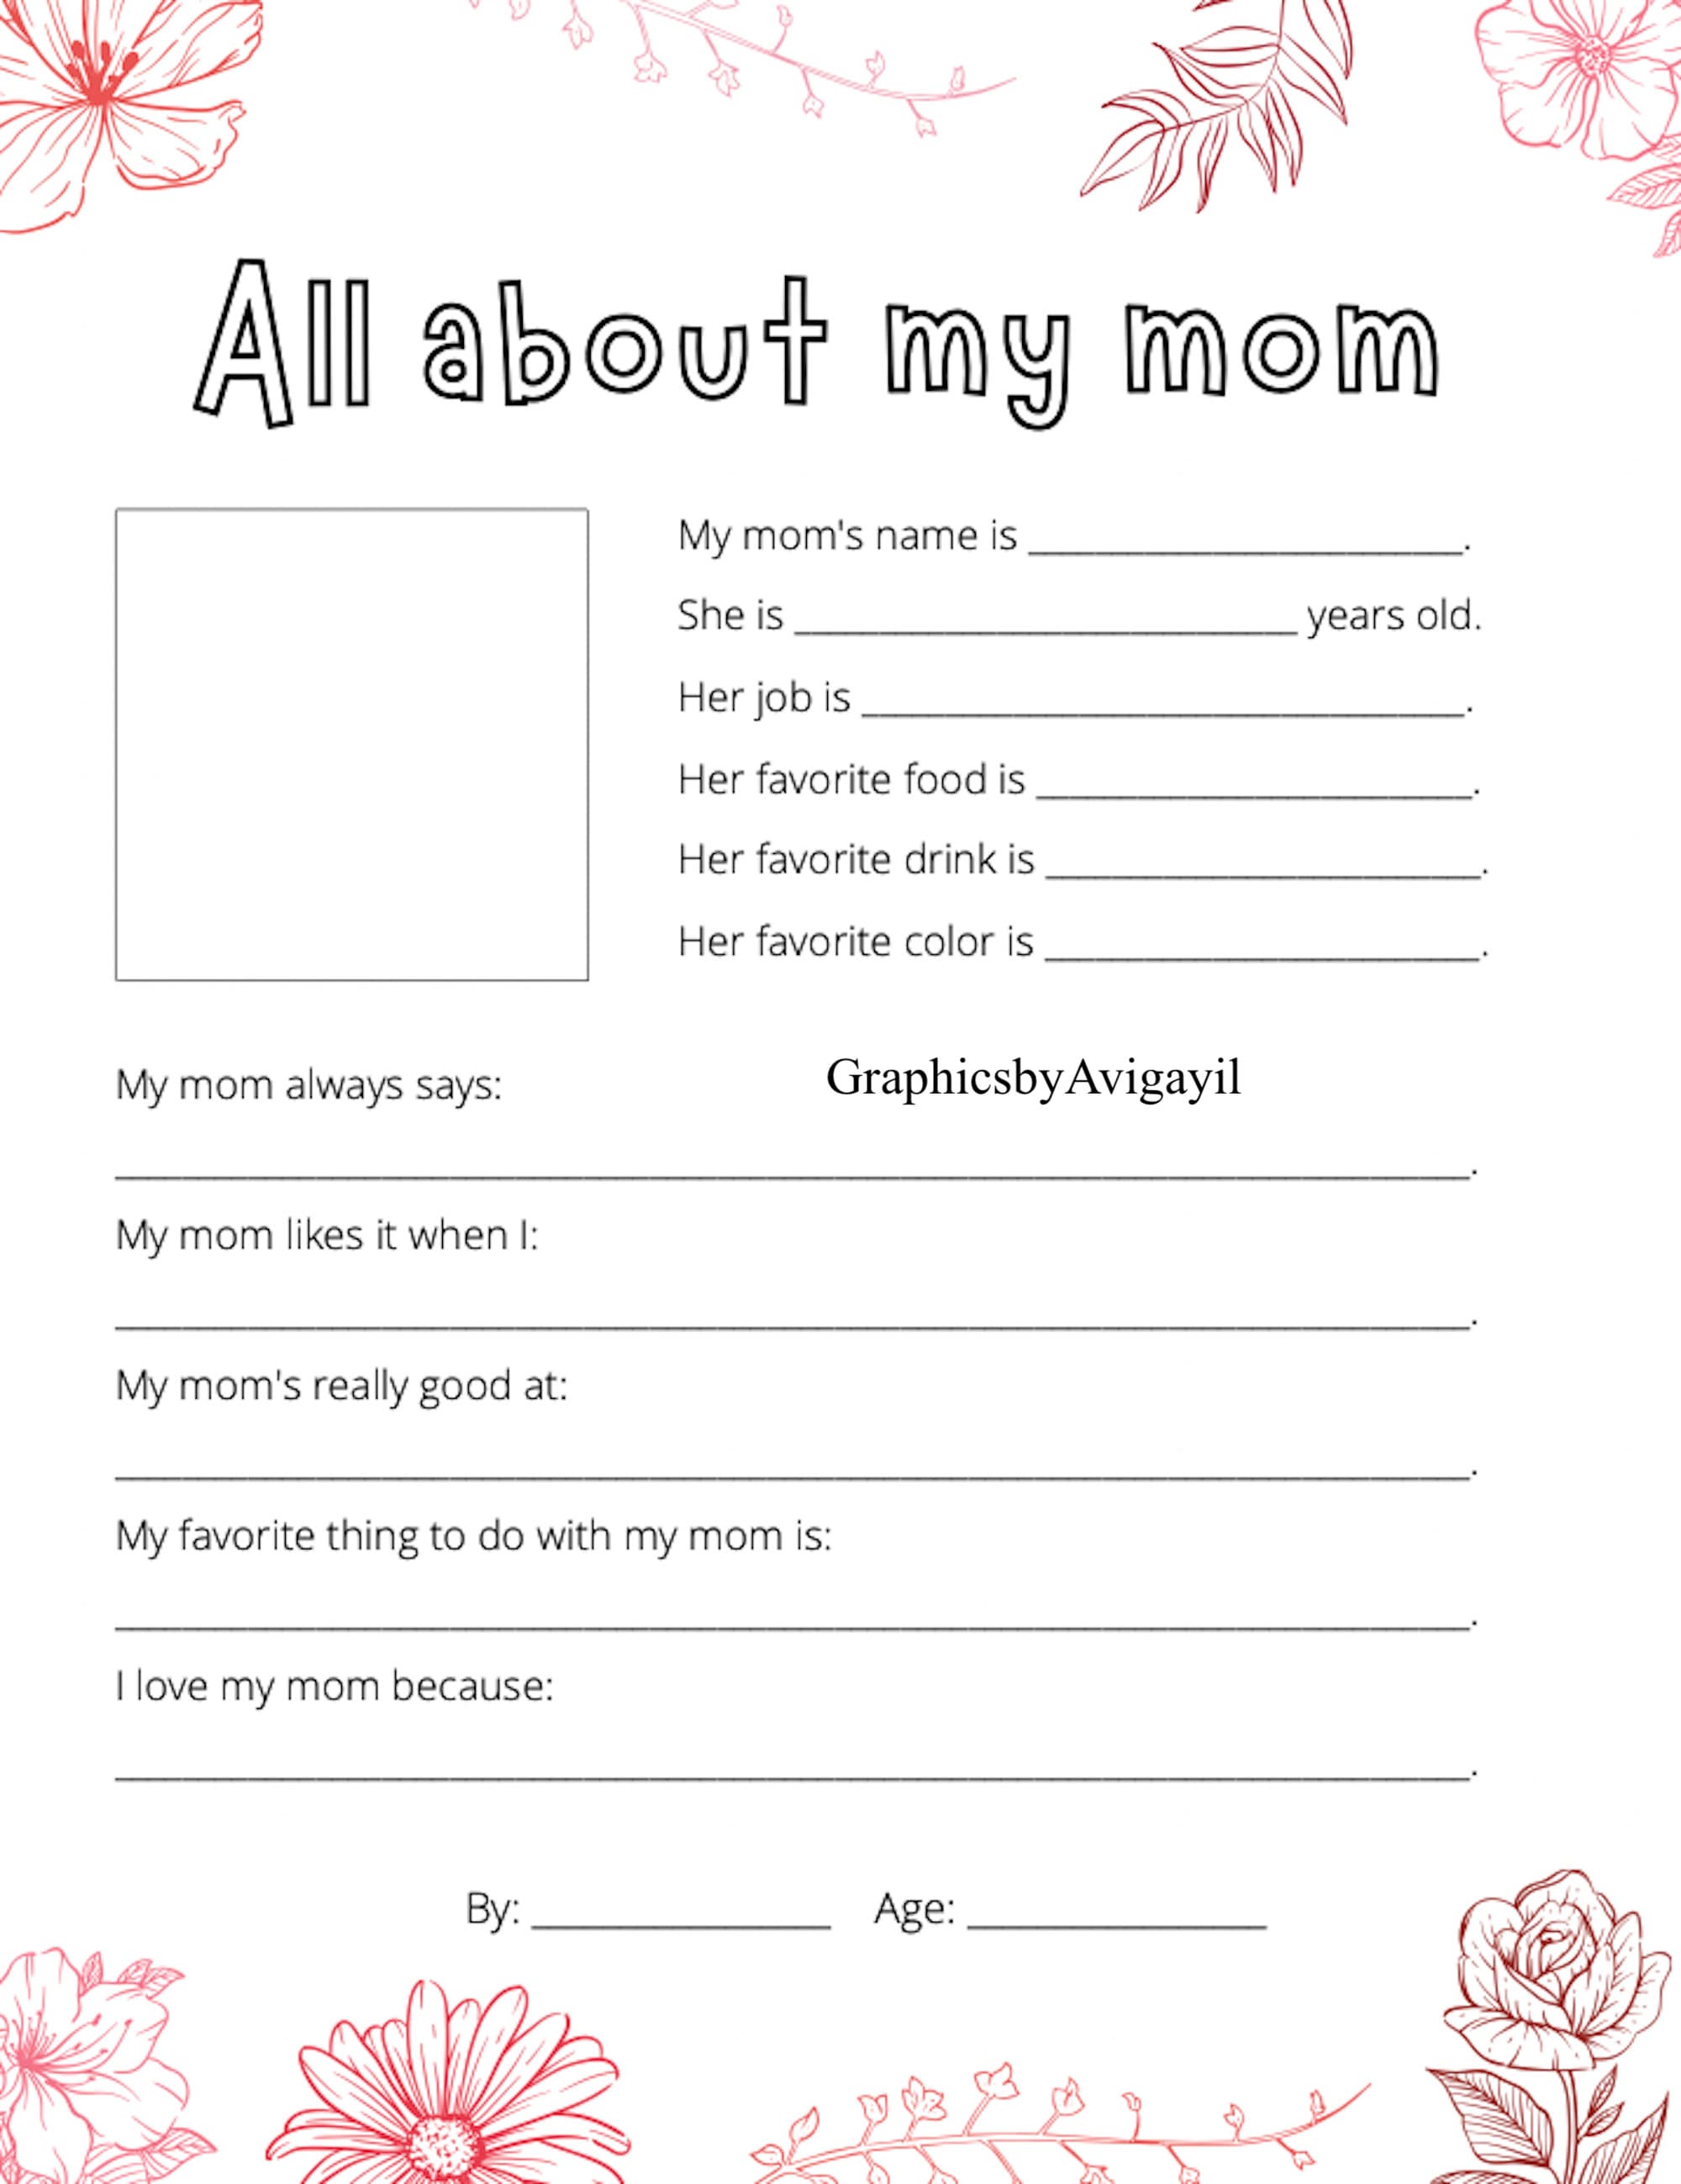 all-about-my-mom-coloring-sheet-mother-s-day-card-etsy